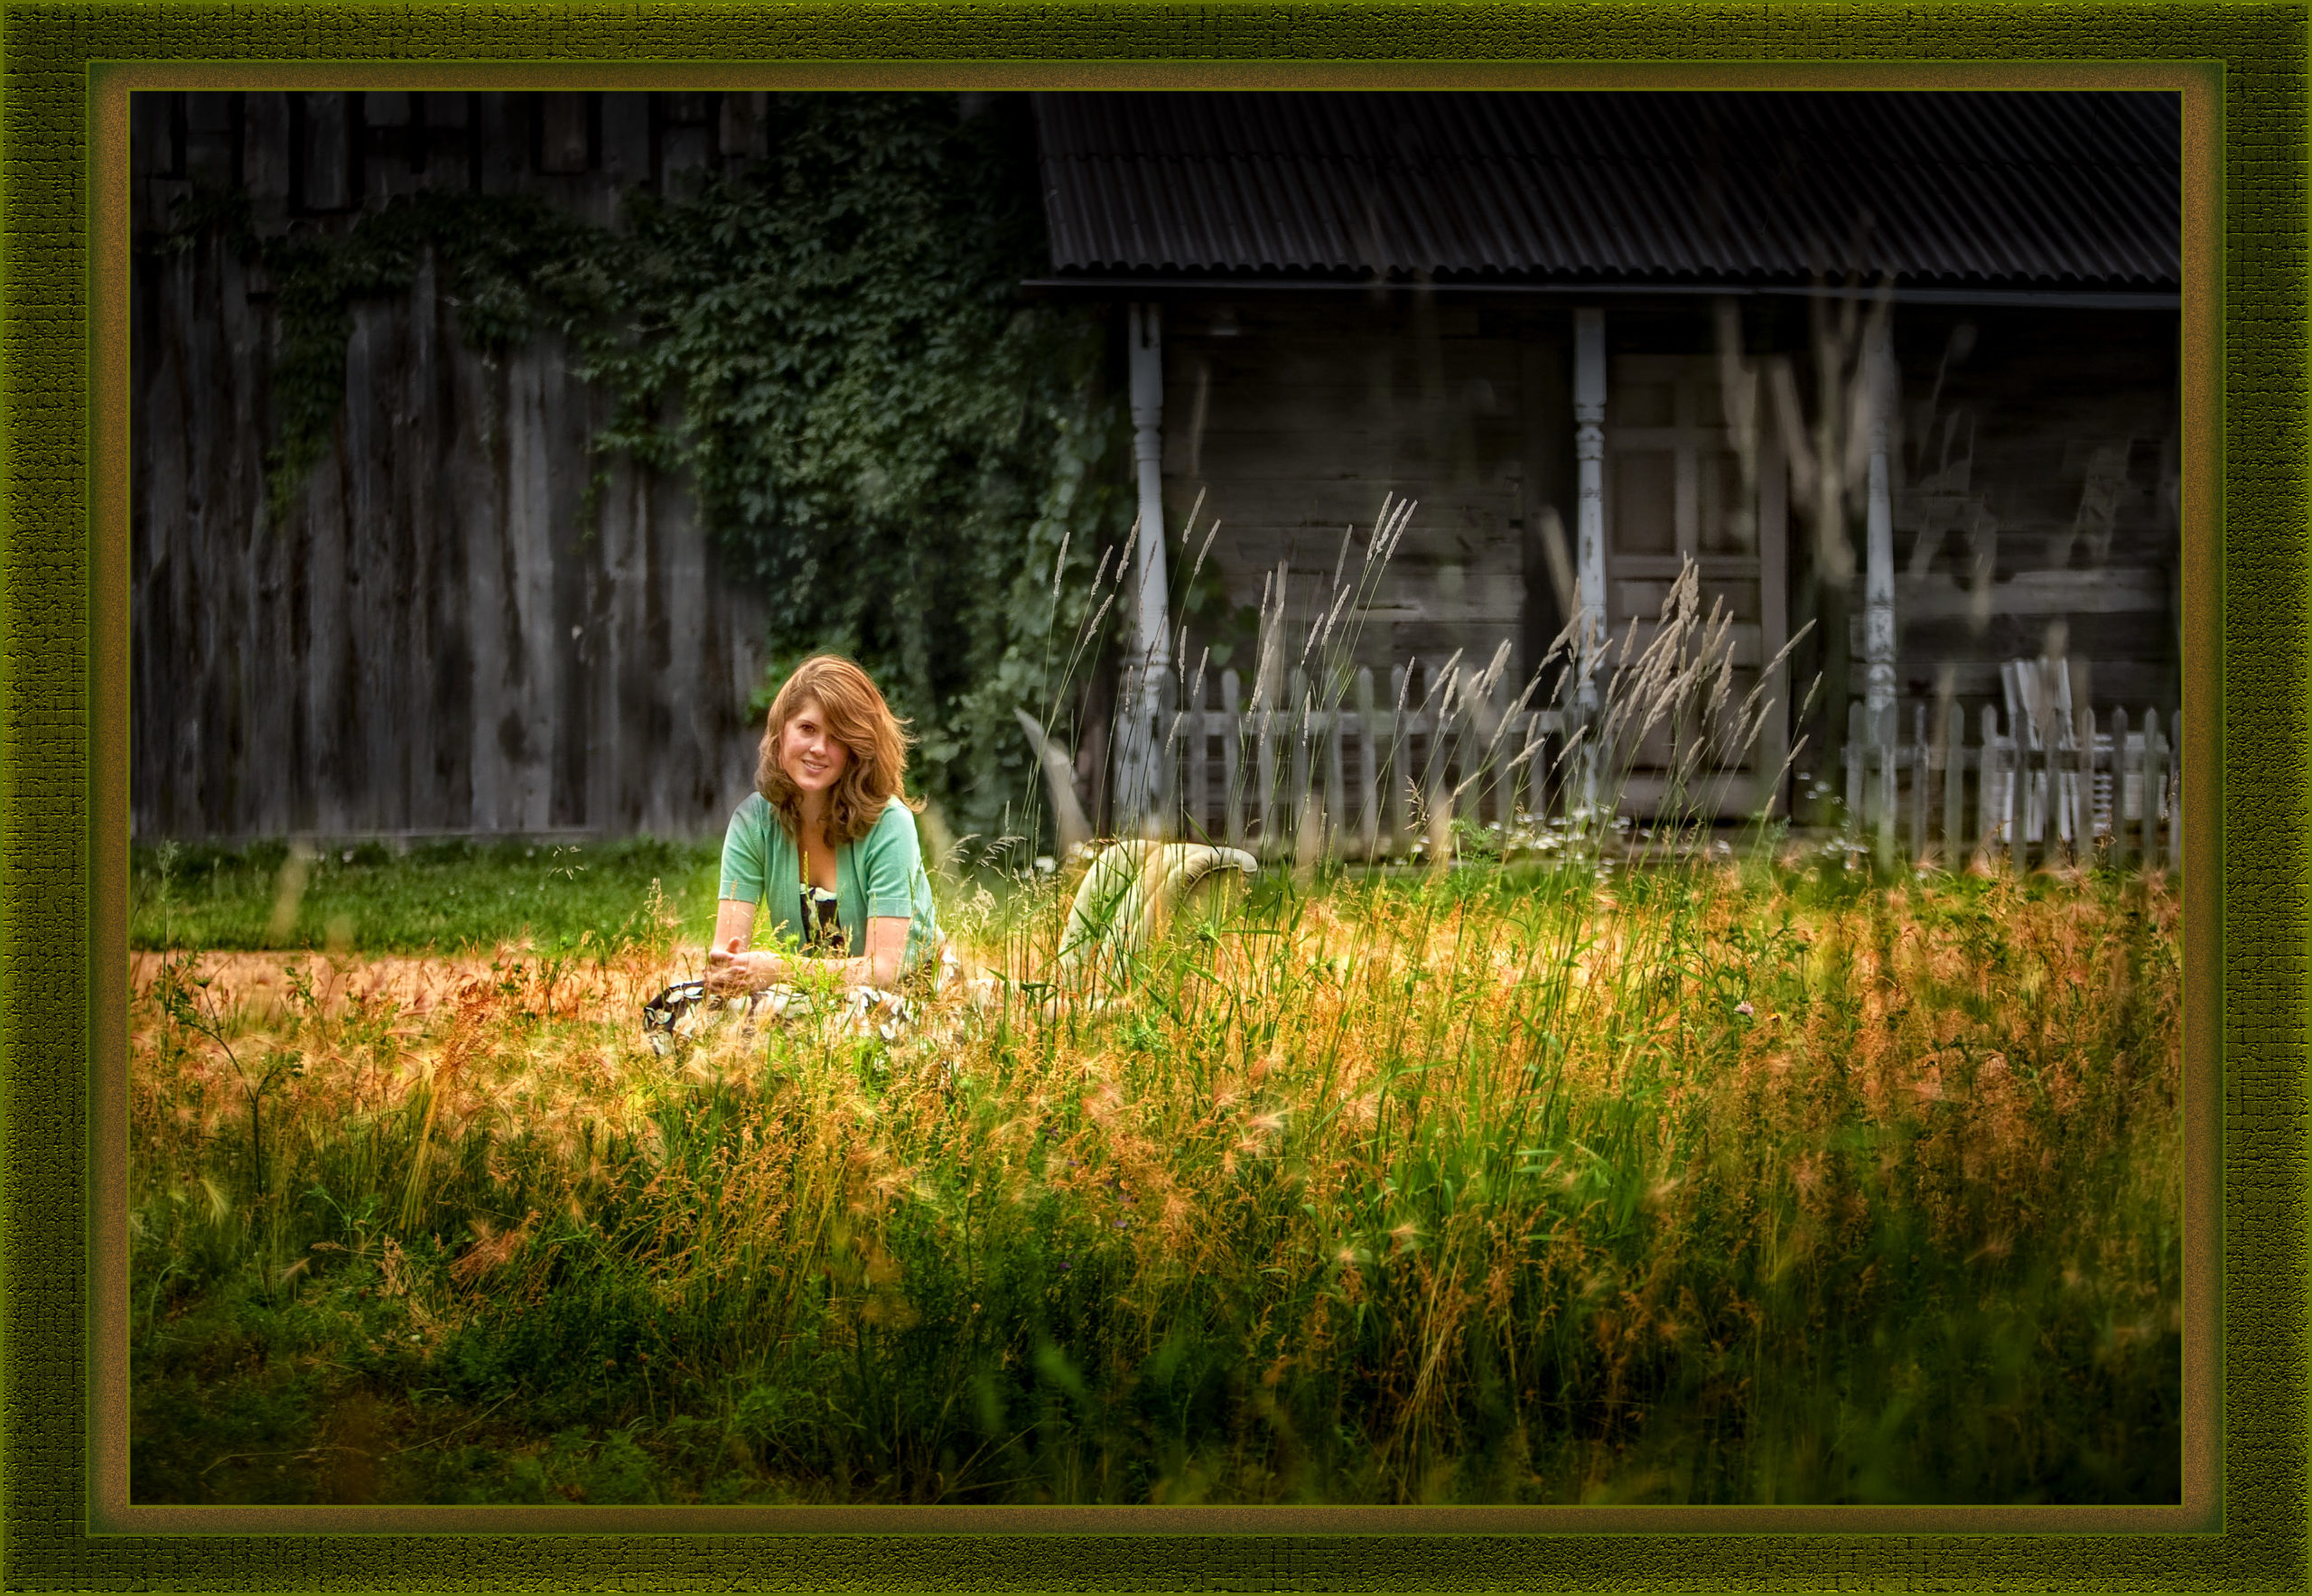 High school senior girl photographed in a field of tall grasses in front of an abandoned looking building. At 1120 N Hickory Farm Ln, KenMar's private photo park.